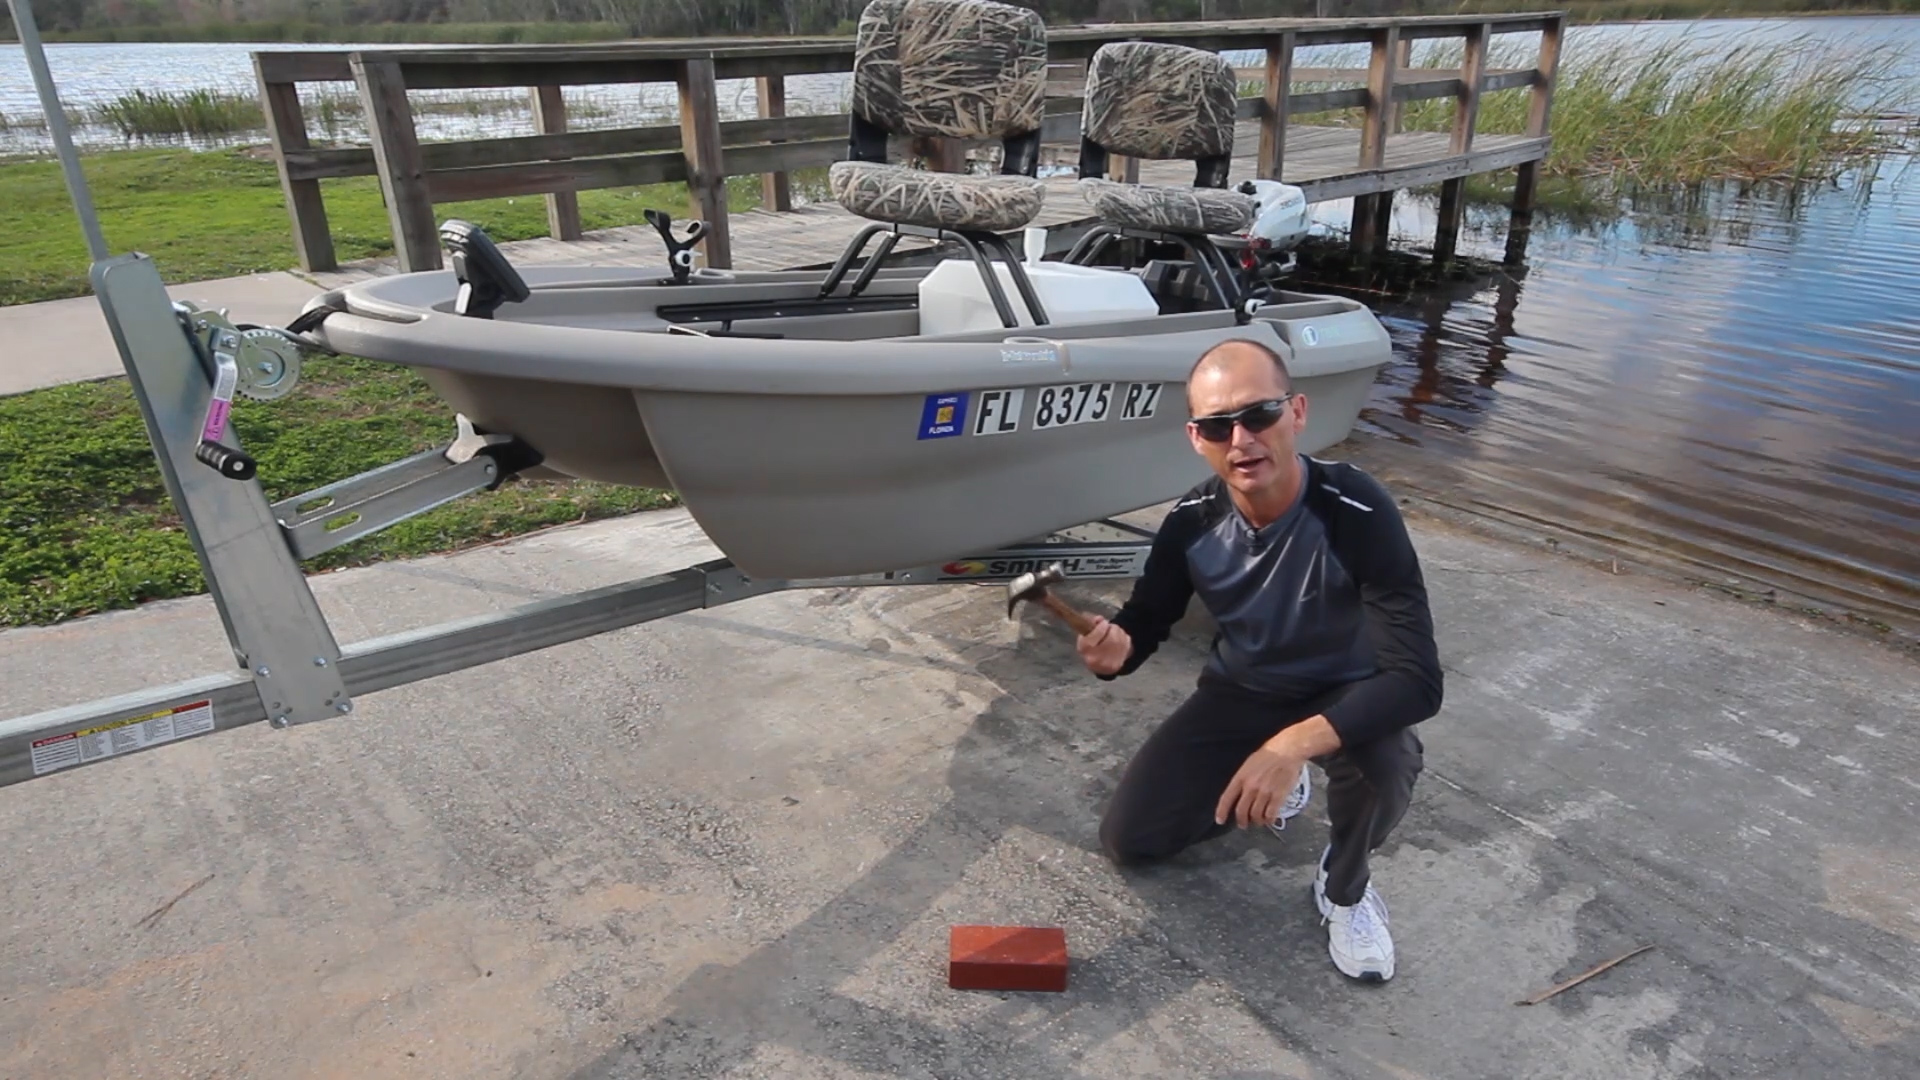 Twin Troller X10 - The Worlds Best Fishing Boat - 2 man small bass ...